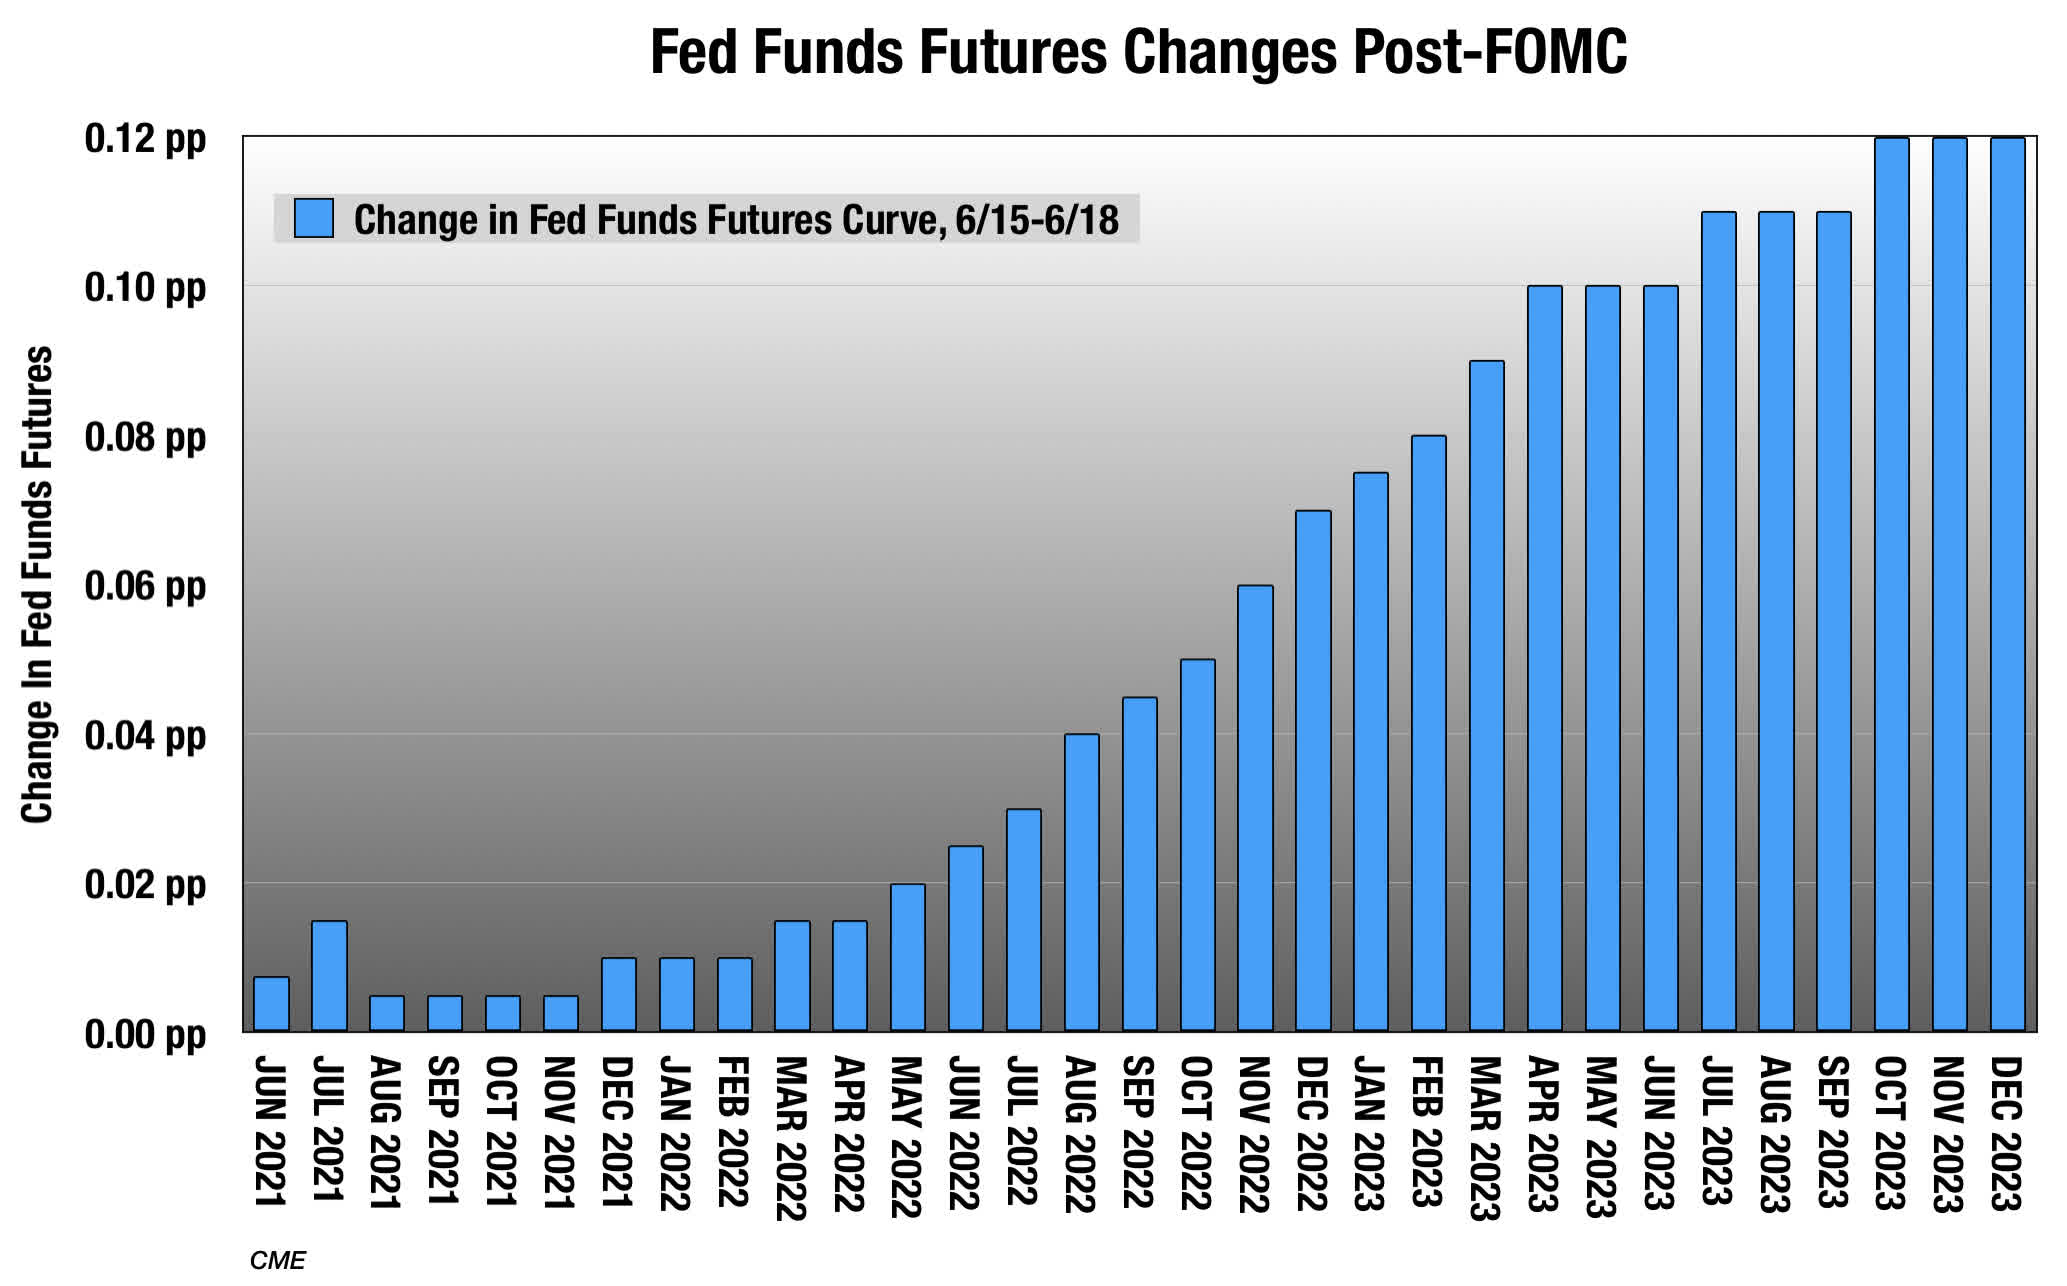 Why the Fed's Dot Plot Matters - TheStreet